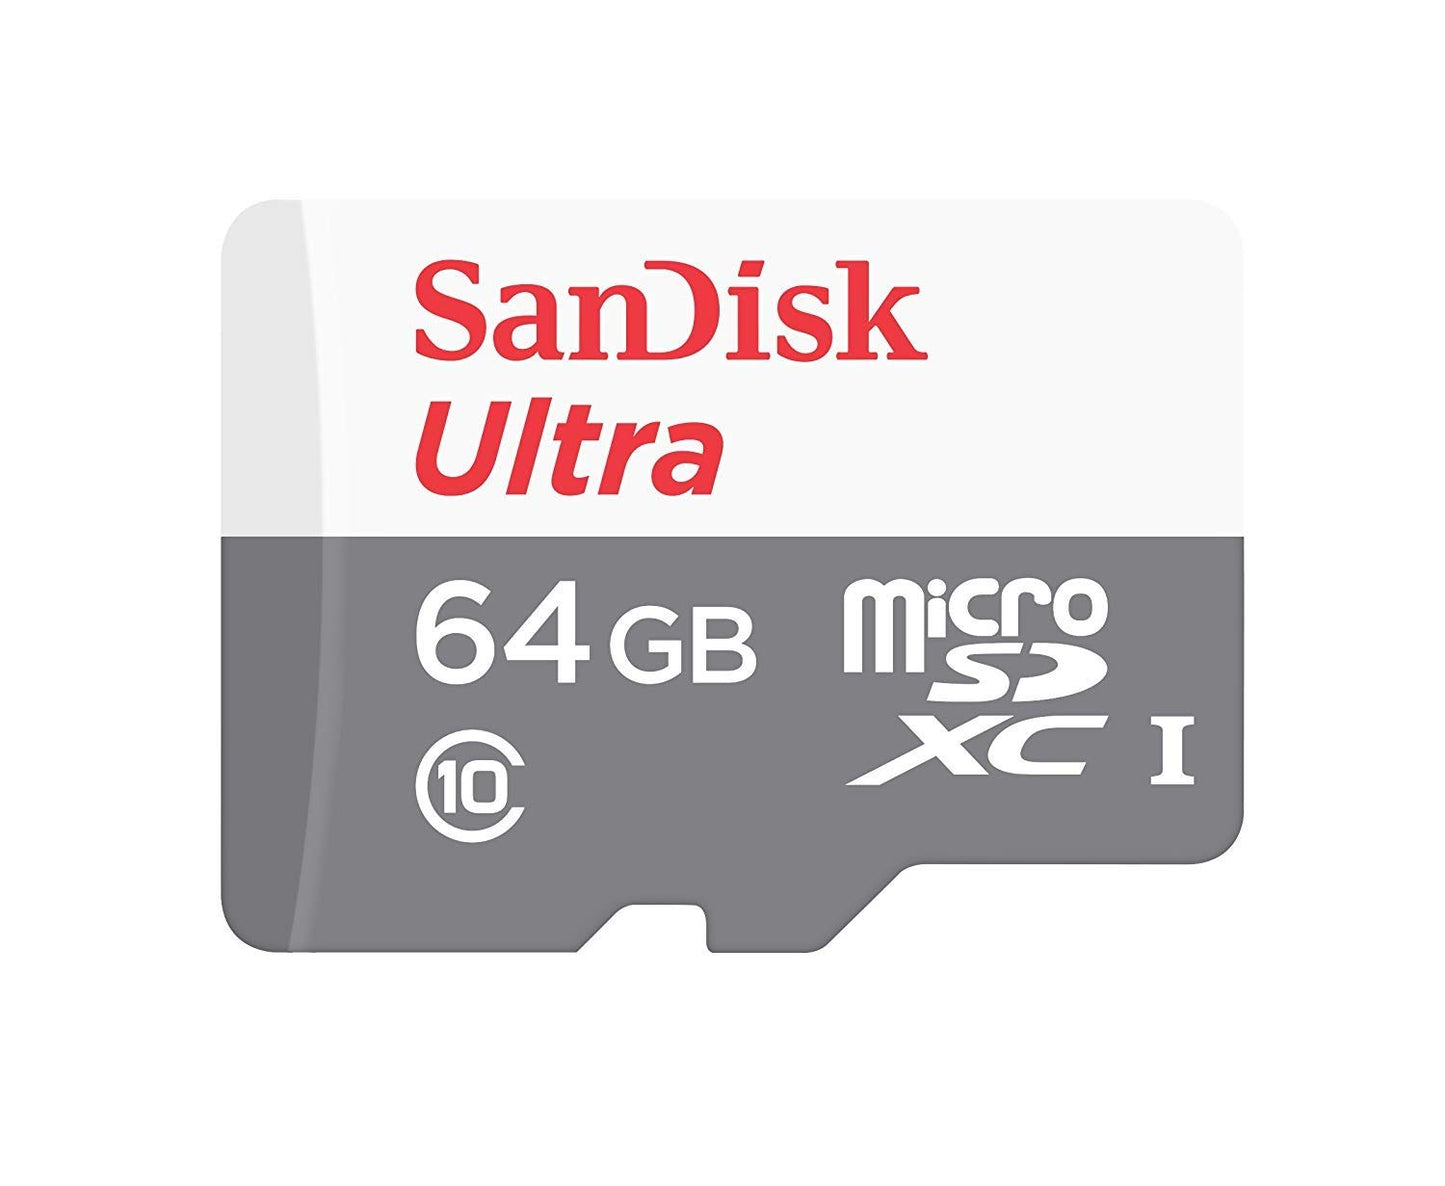 Made for Amazon SanDisk 512GB microSD Memory Card for Fire Tablets and Fire -TV